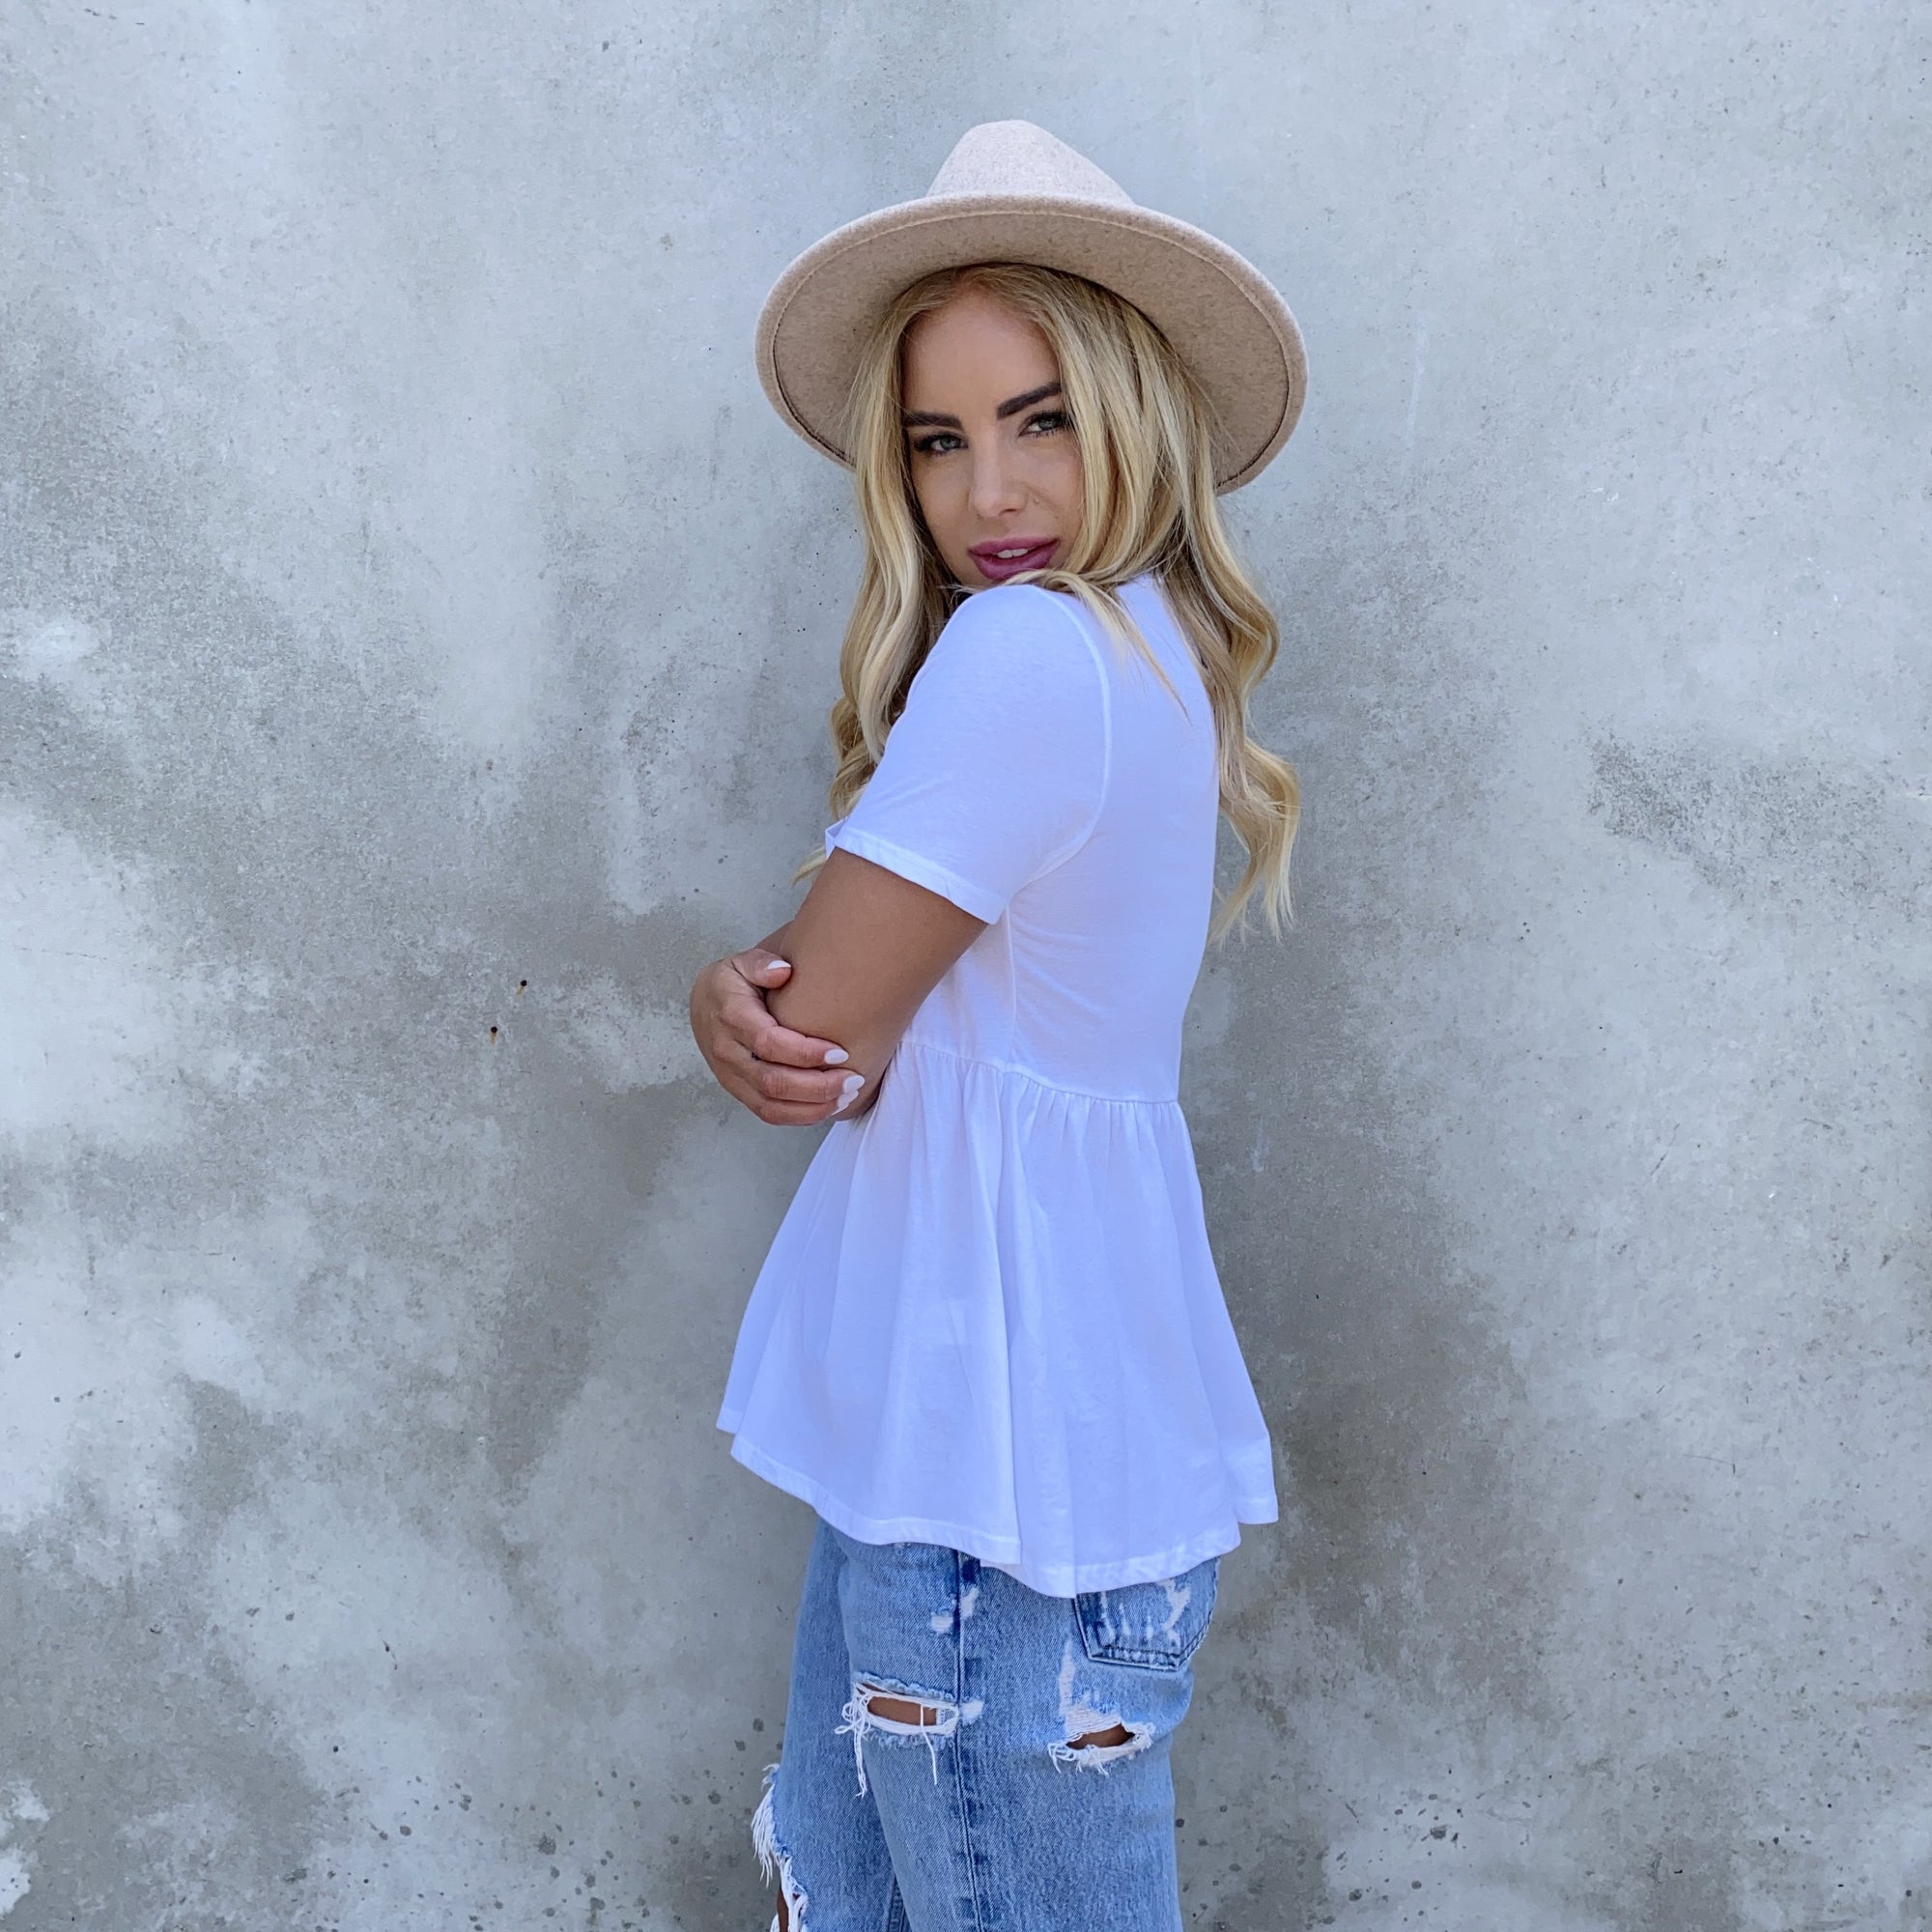 Cotton Babydoll Tunic Top in White